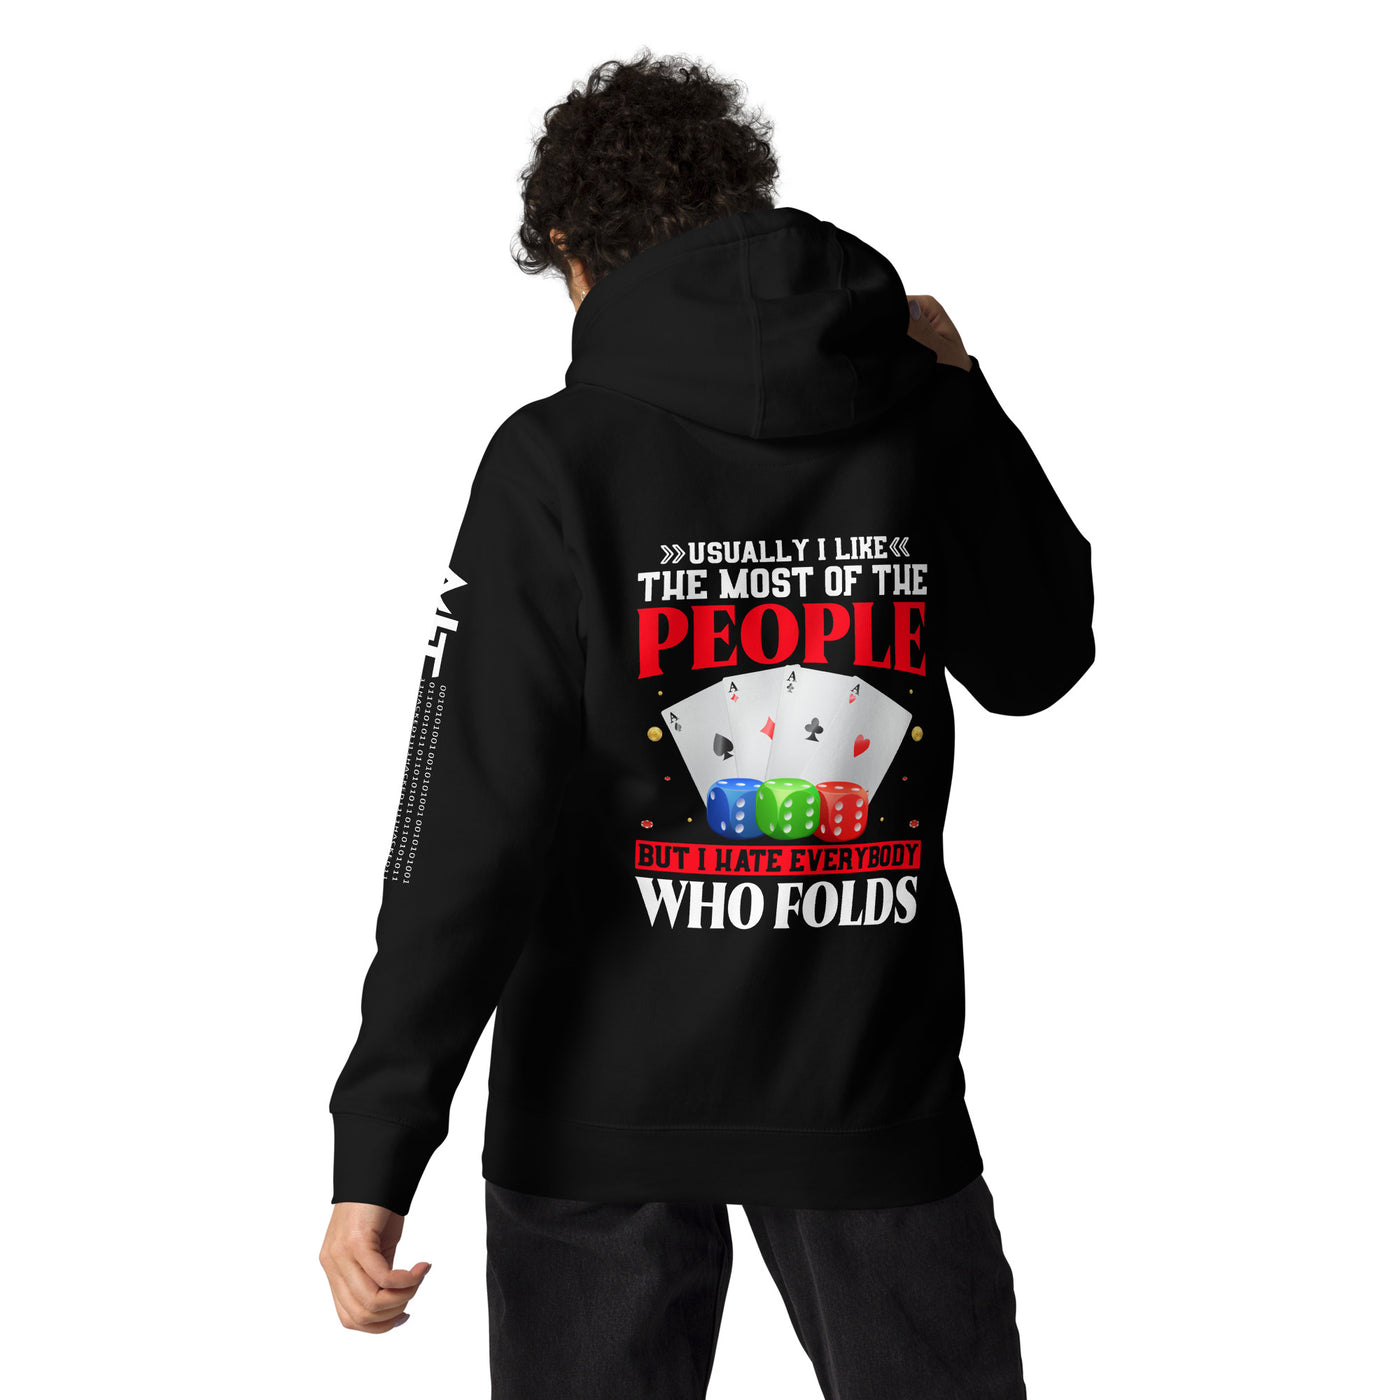 Usually I Like Most of the People But I Hate everyone who Folds - Unisex Hoodie ( Back Print )